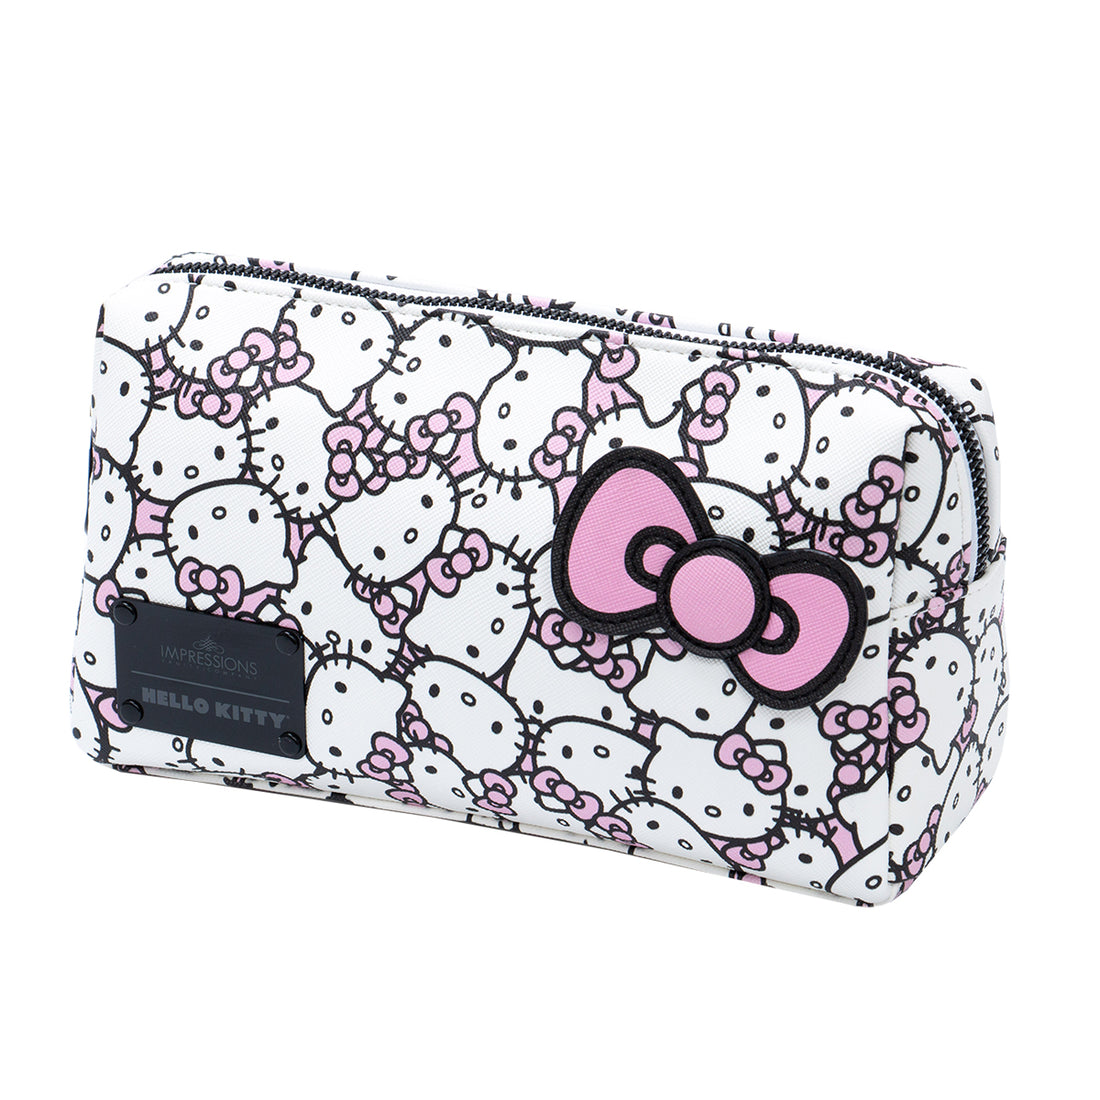 Hello Kitty Cosmetic Bag • Impressions Vanity Co.